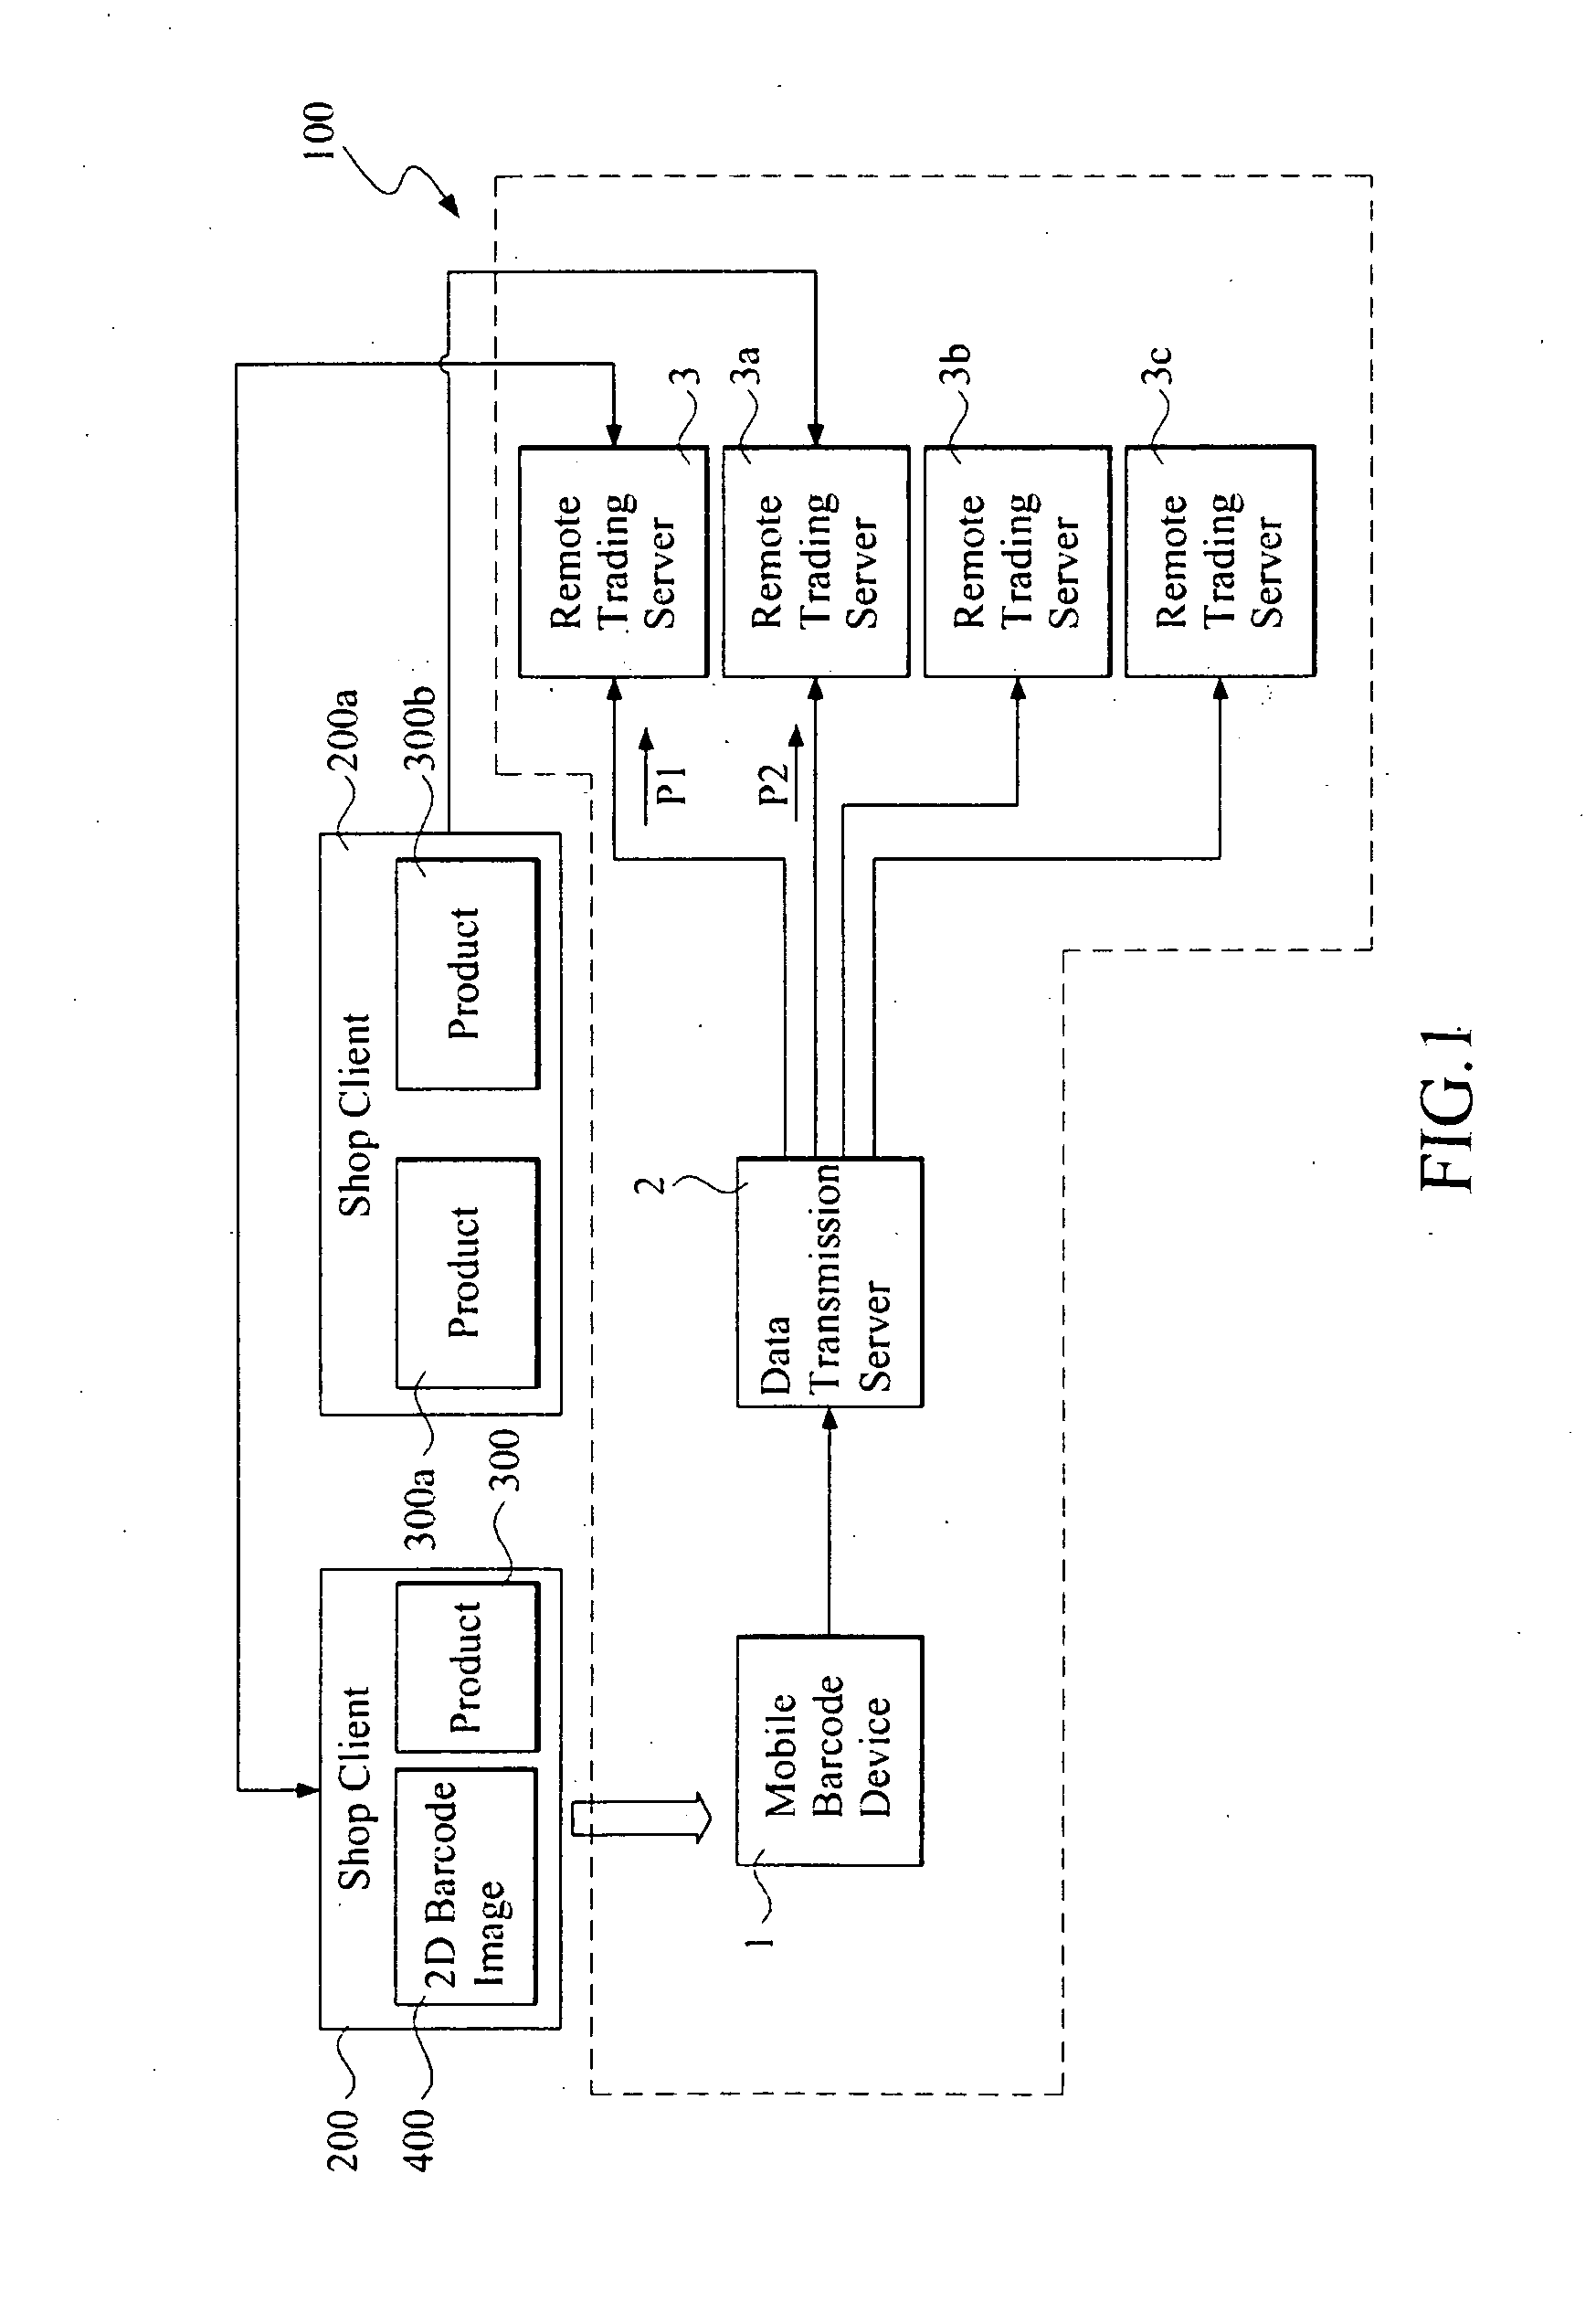 Mobile transaction system and method